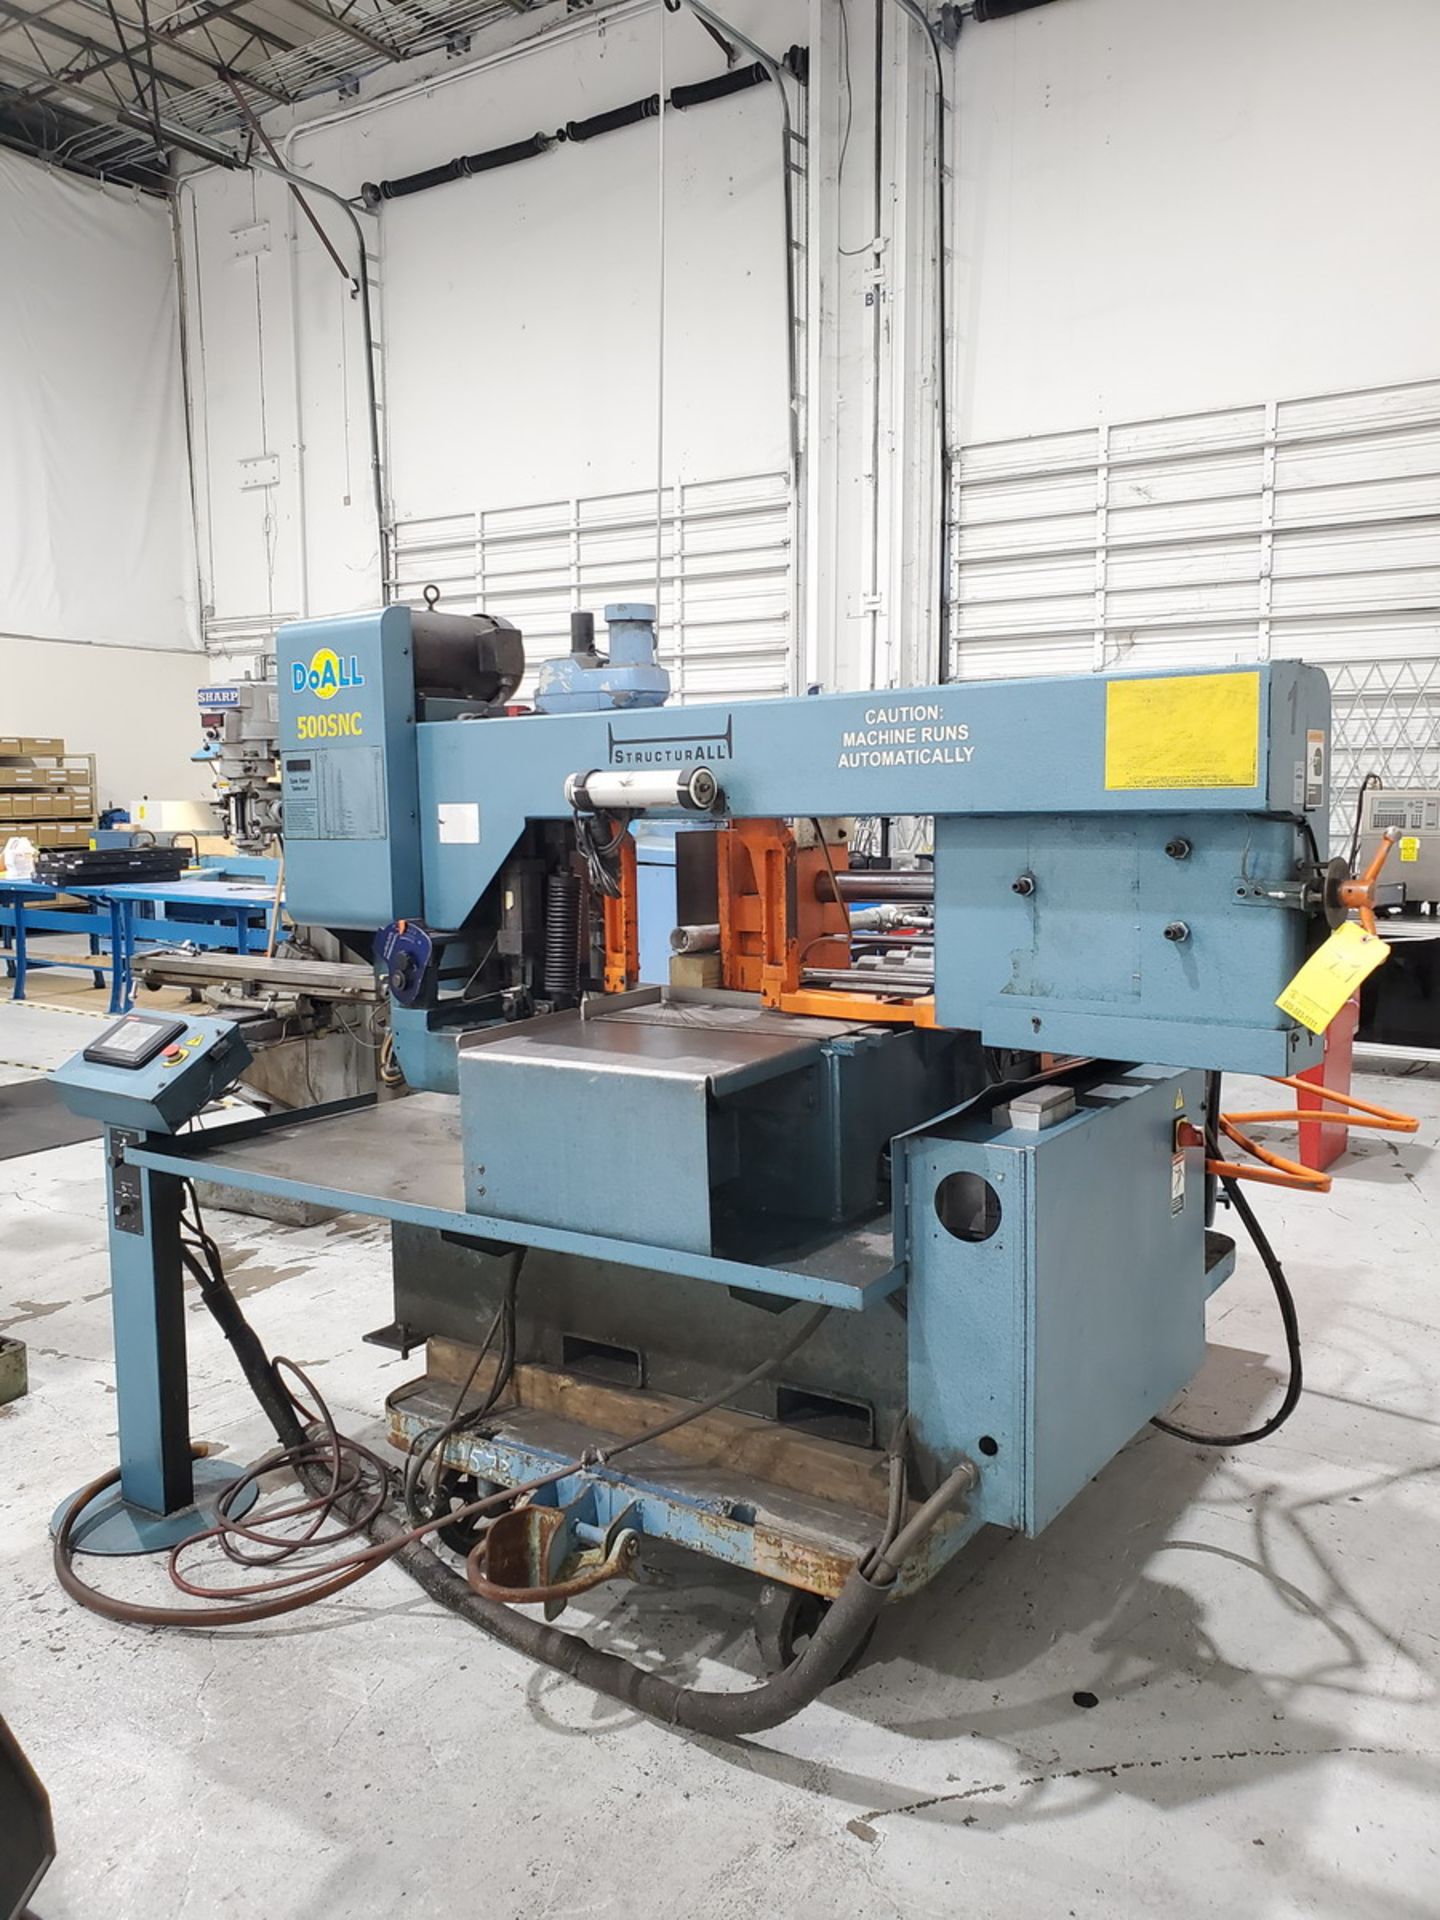 DoAll 500SNC 14" x 20" Horizontal Bandsaw (No Tag) W/ Automatic Feed, W/ Quick Panel Controller; - Image 3 of 21